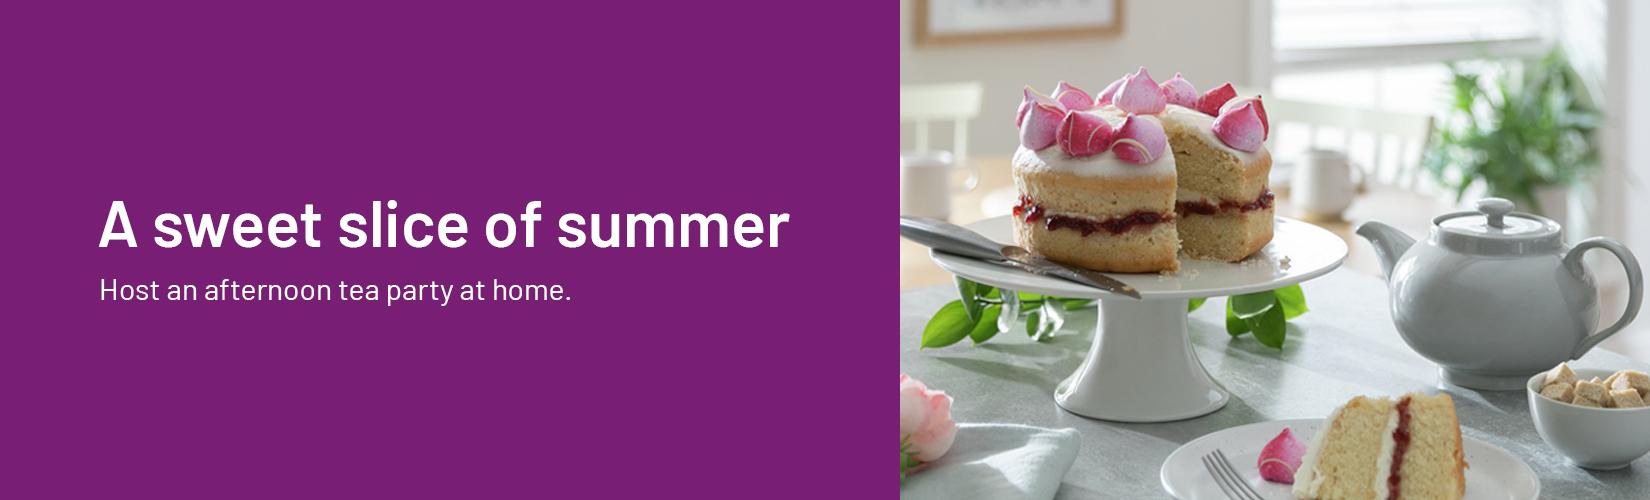 A sweet slice of summer. Host an afternoon tea party at home.